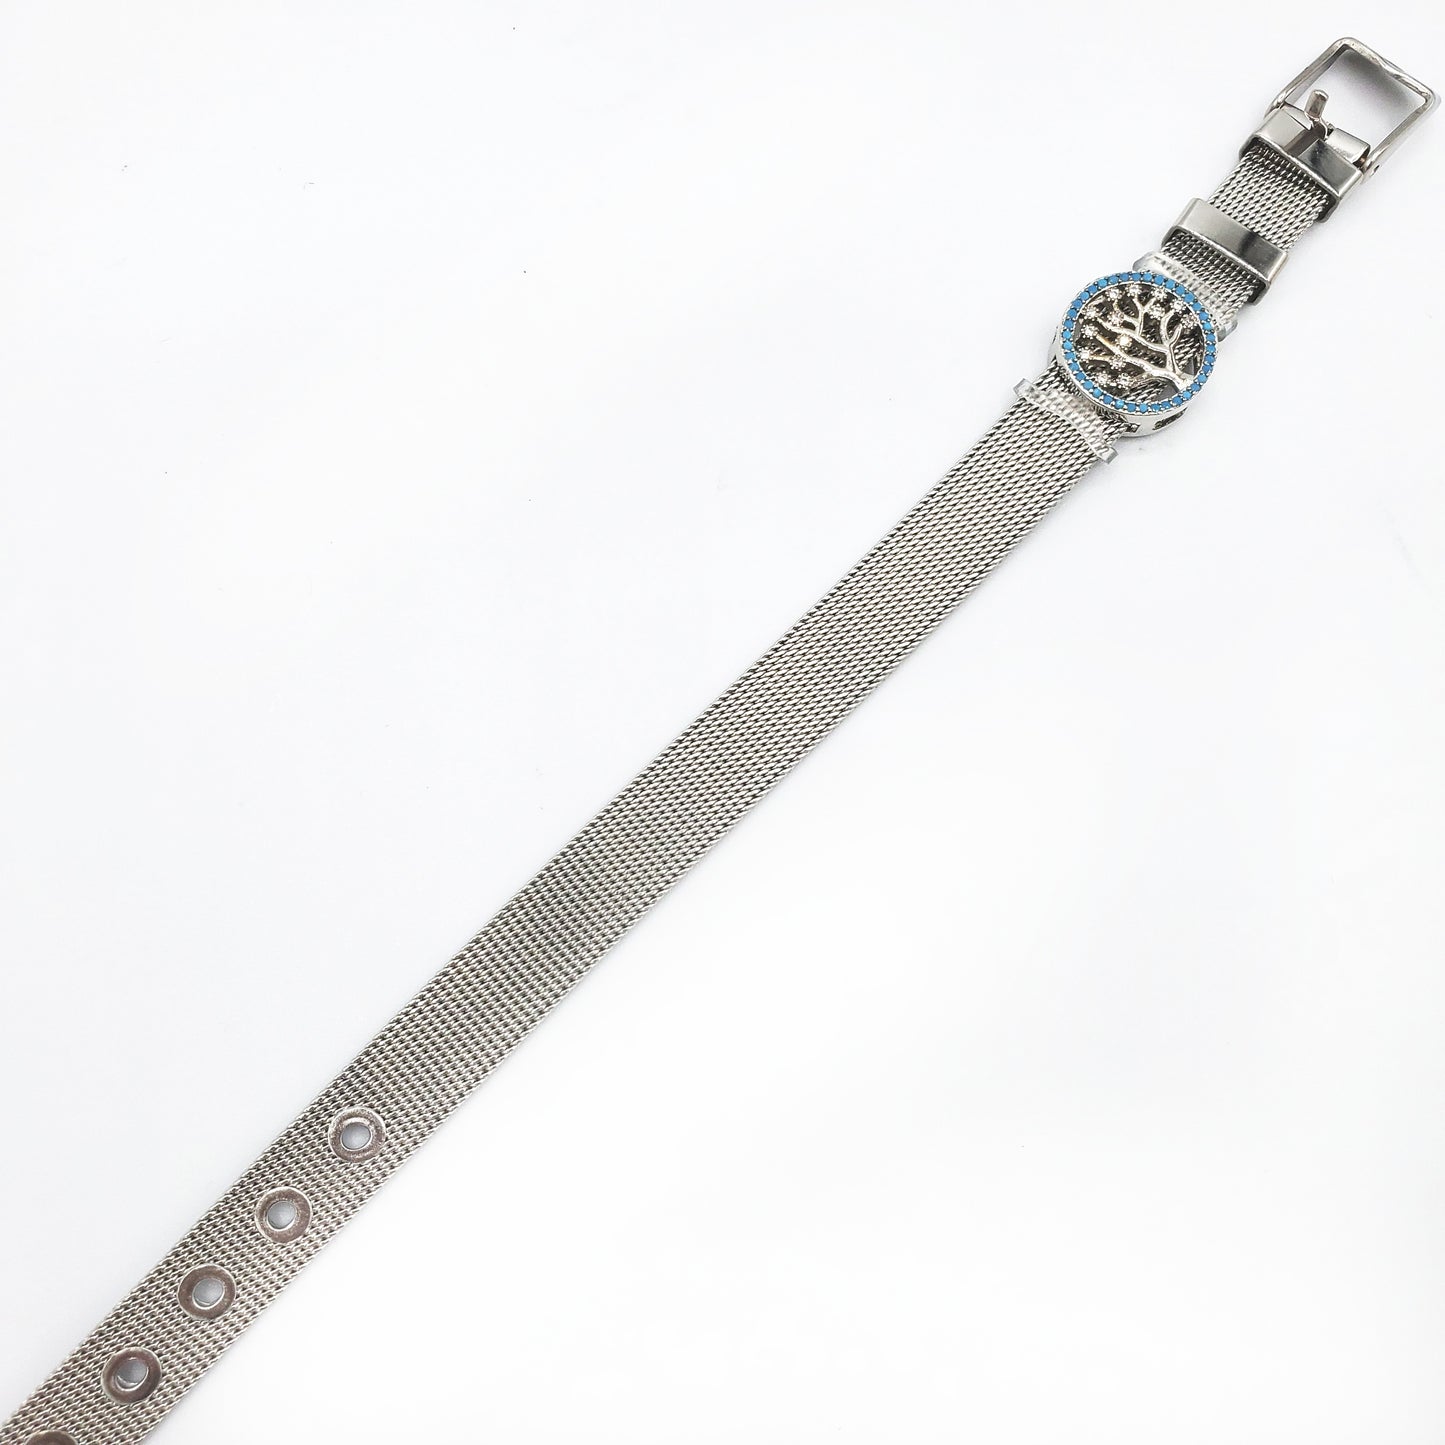 BRS-17 Bracelet/Pulsera Stainless Steel Tree with Blue Stones 8"